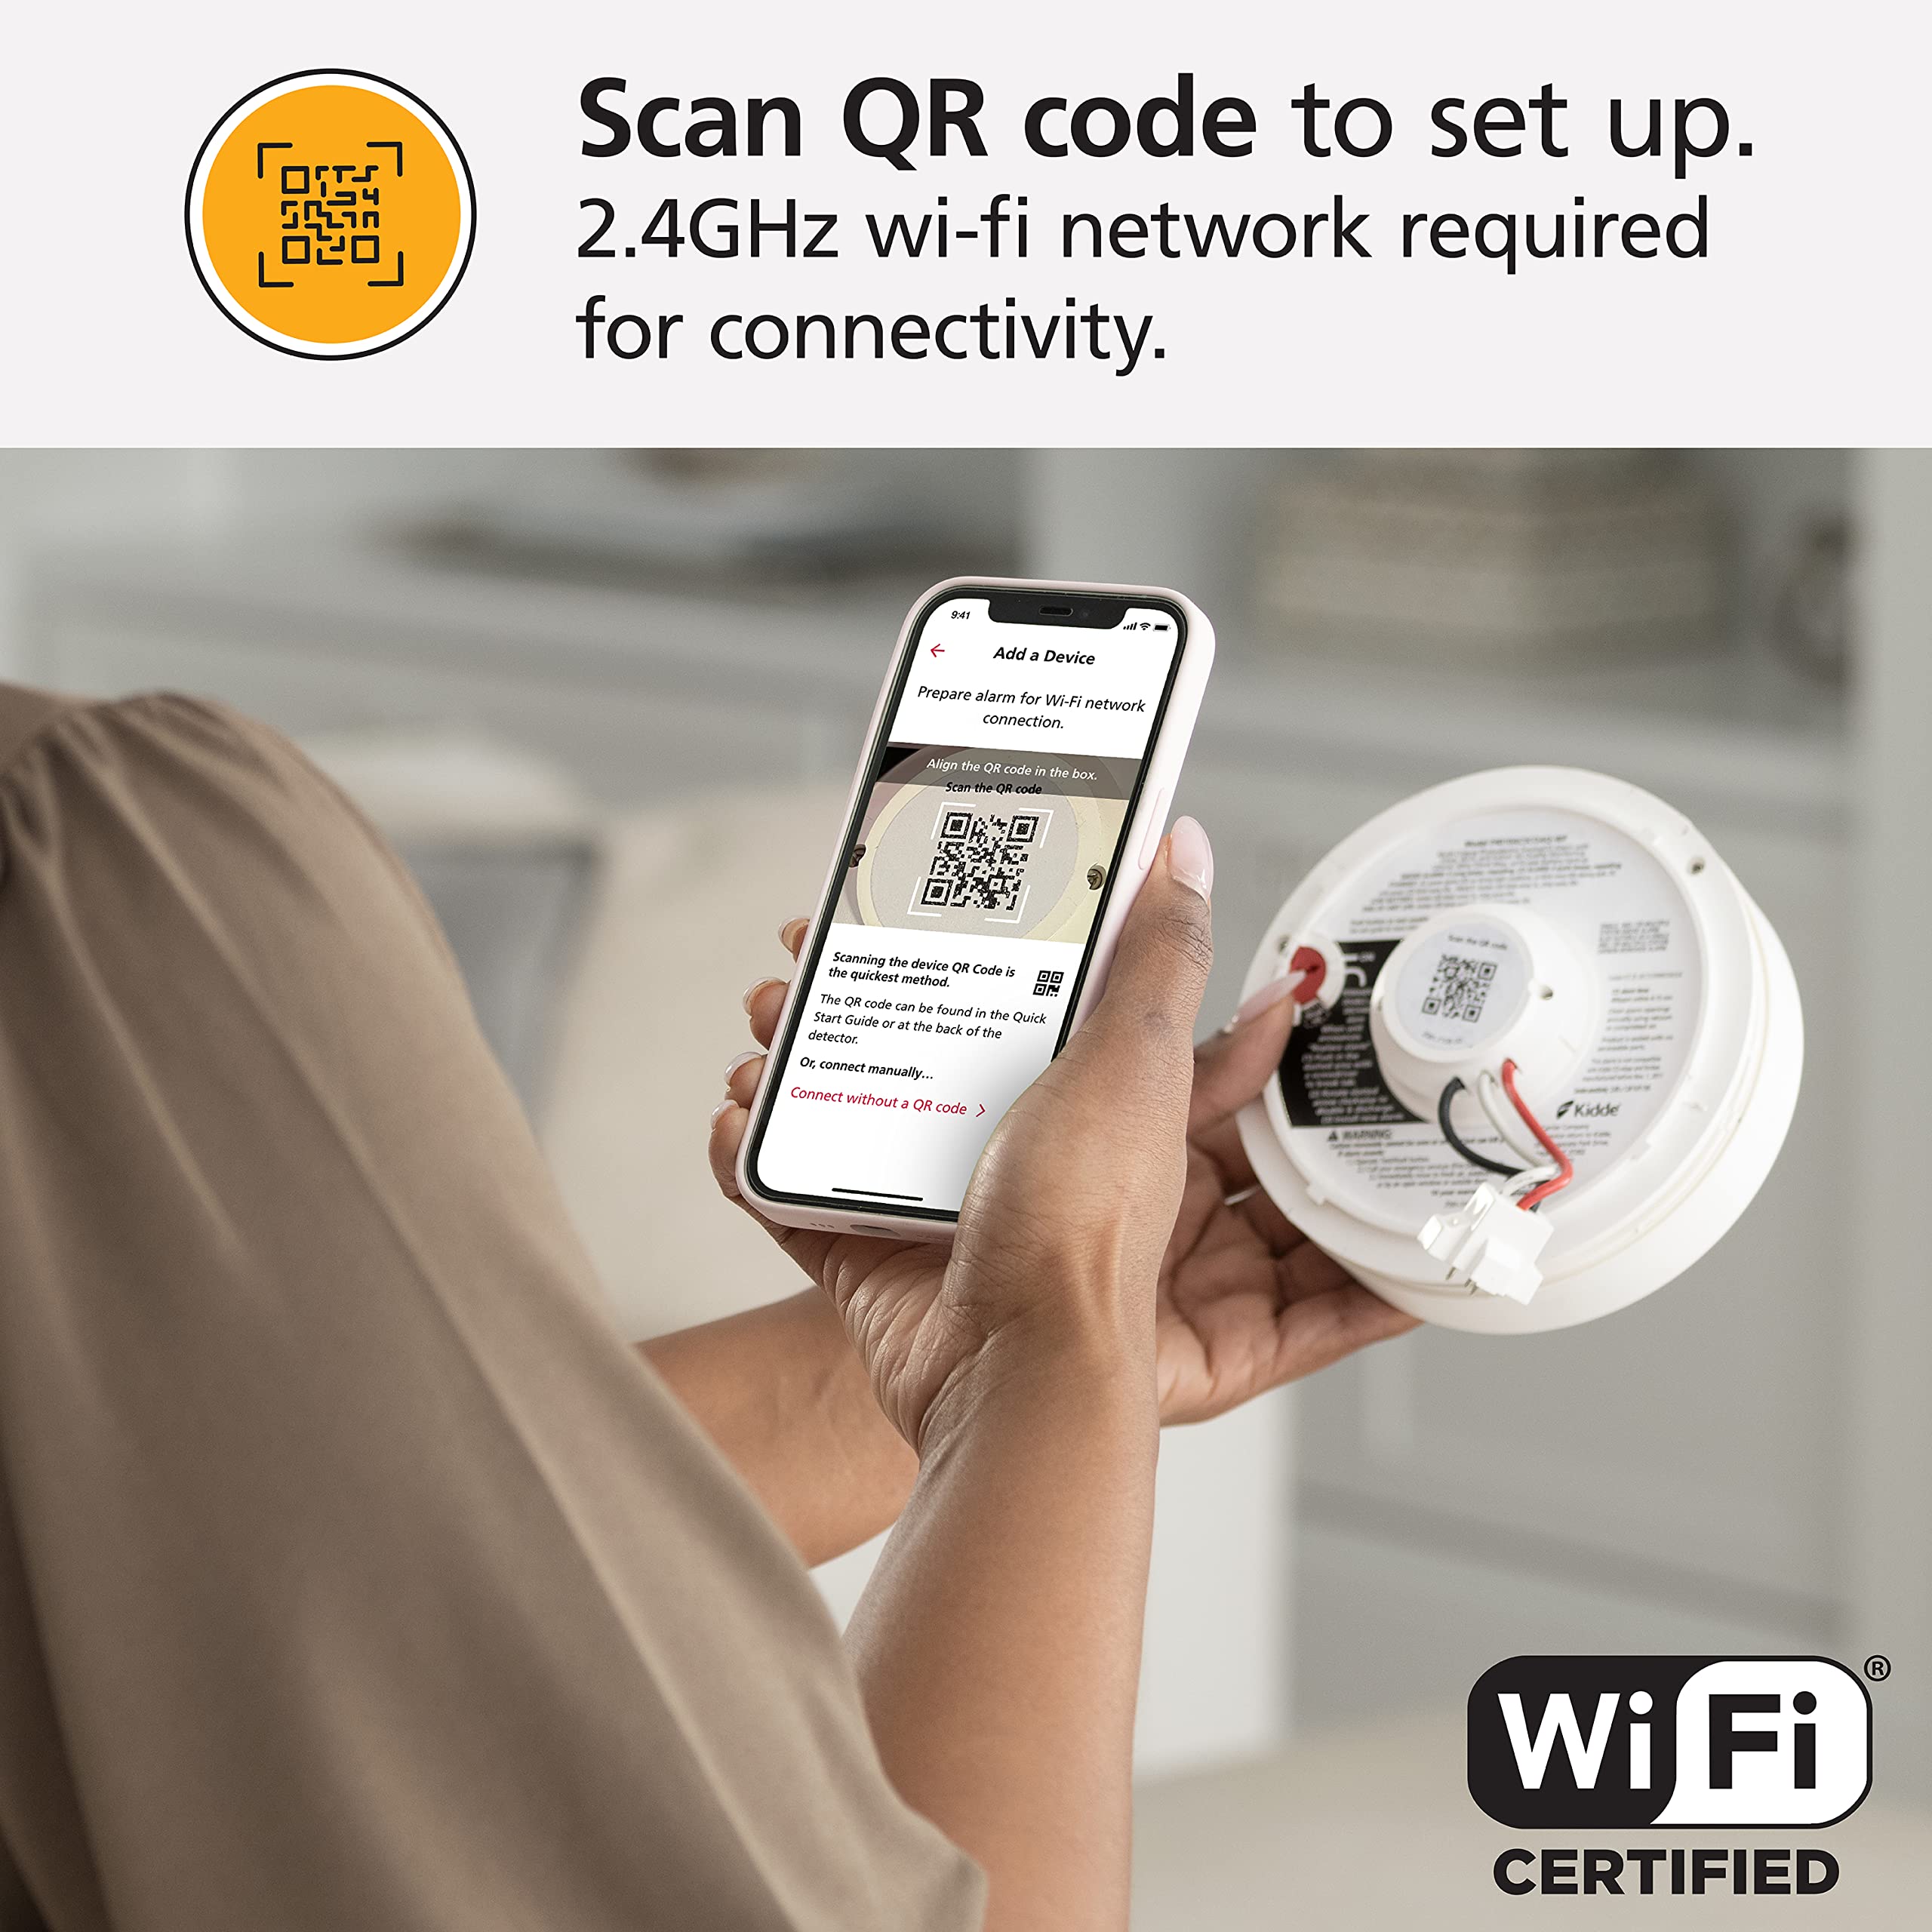 Kidde Smart Smoke Detector & Indoor Air Quality Monitor, WiFi, Alexa Compatible Device, Hardwired w/Battery Backup, Voice & App Alerts